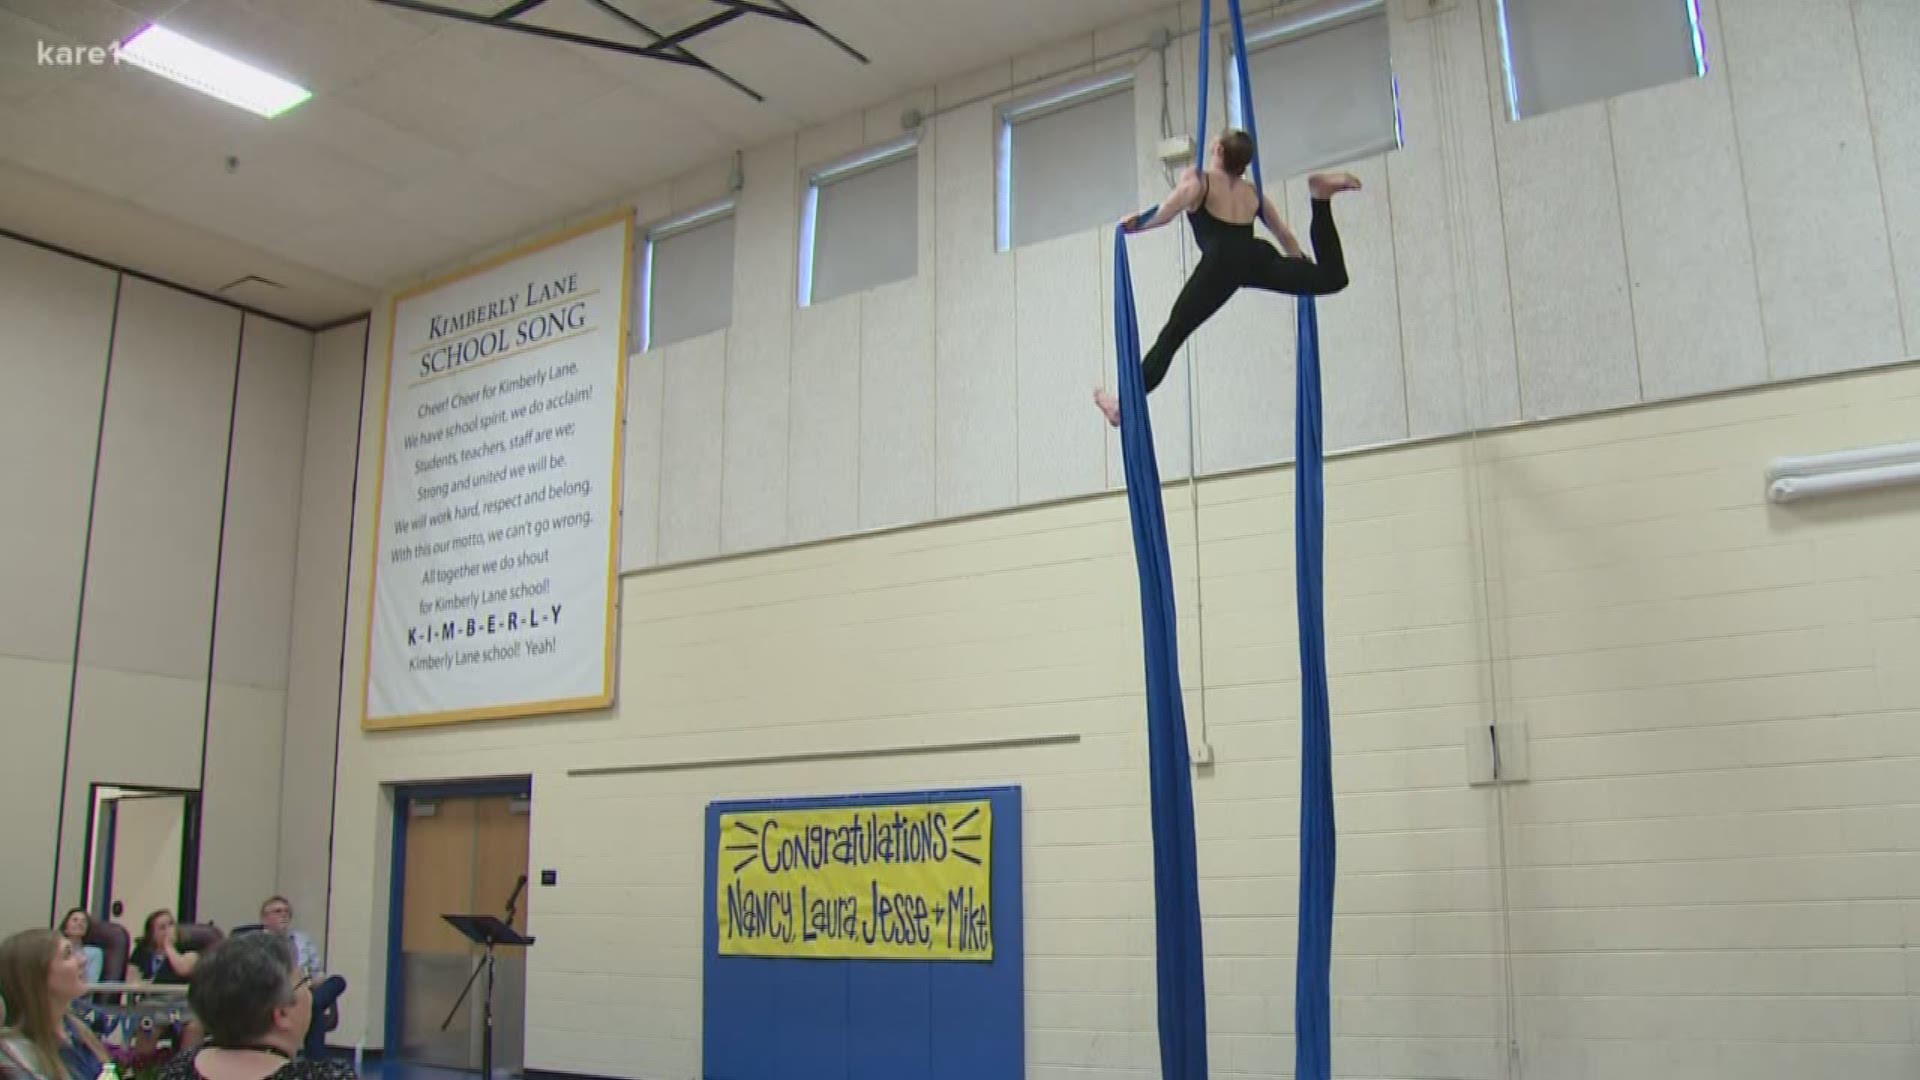 A retiring phys ed teacher in the Wayzata School District got an amazing surprise Wednesday, when a former student and acrobat dropped in to give him a personal thank you.